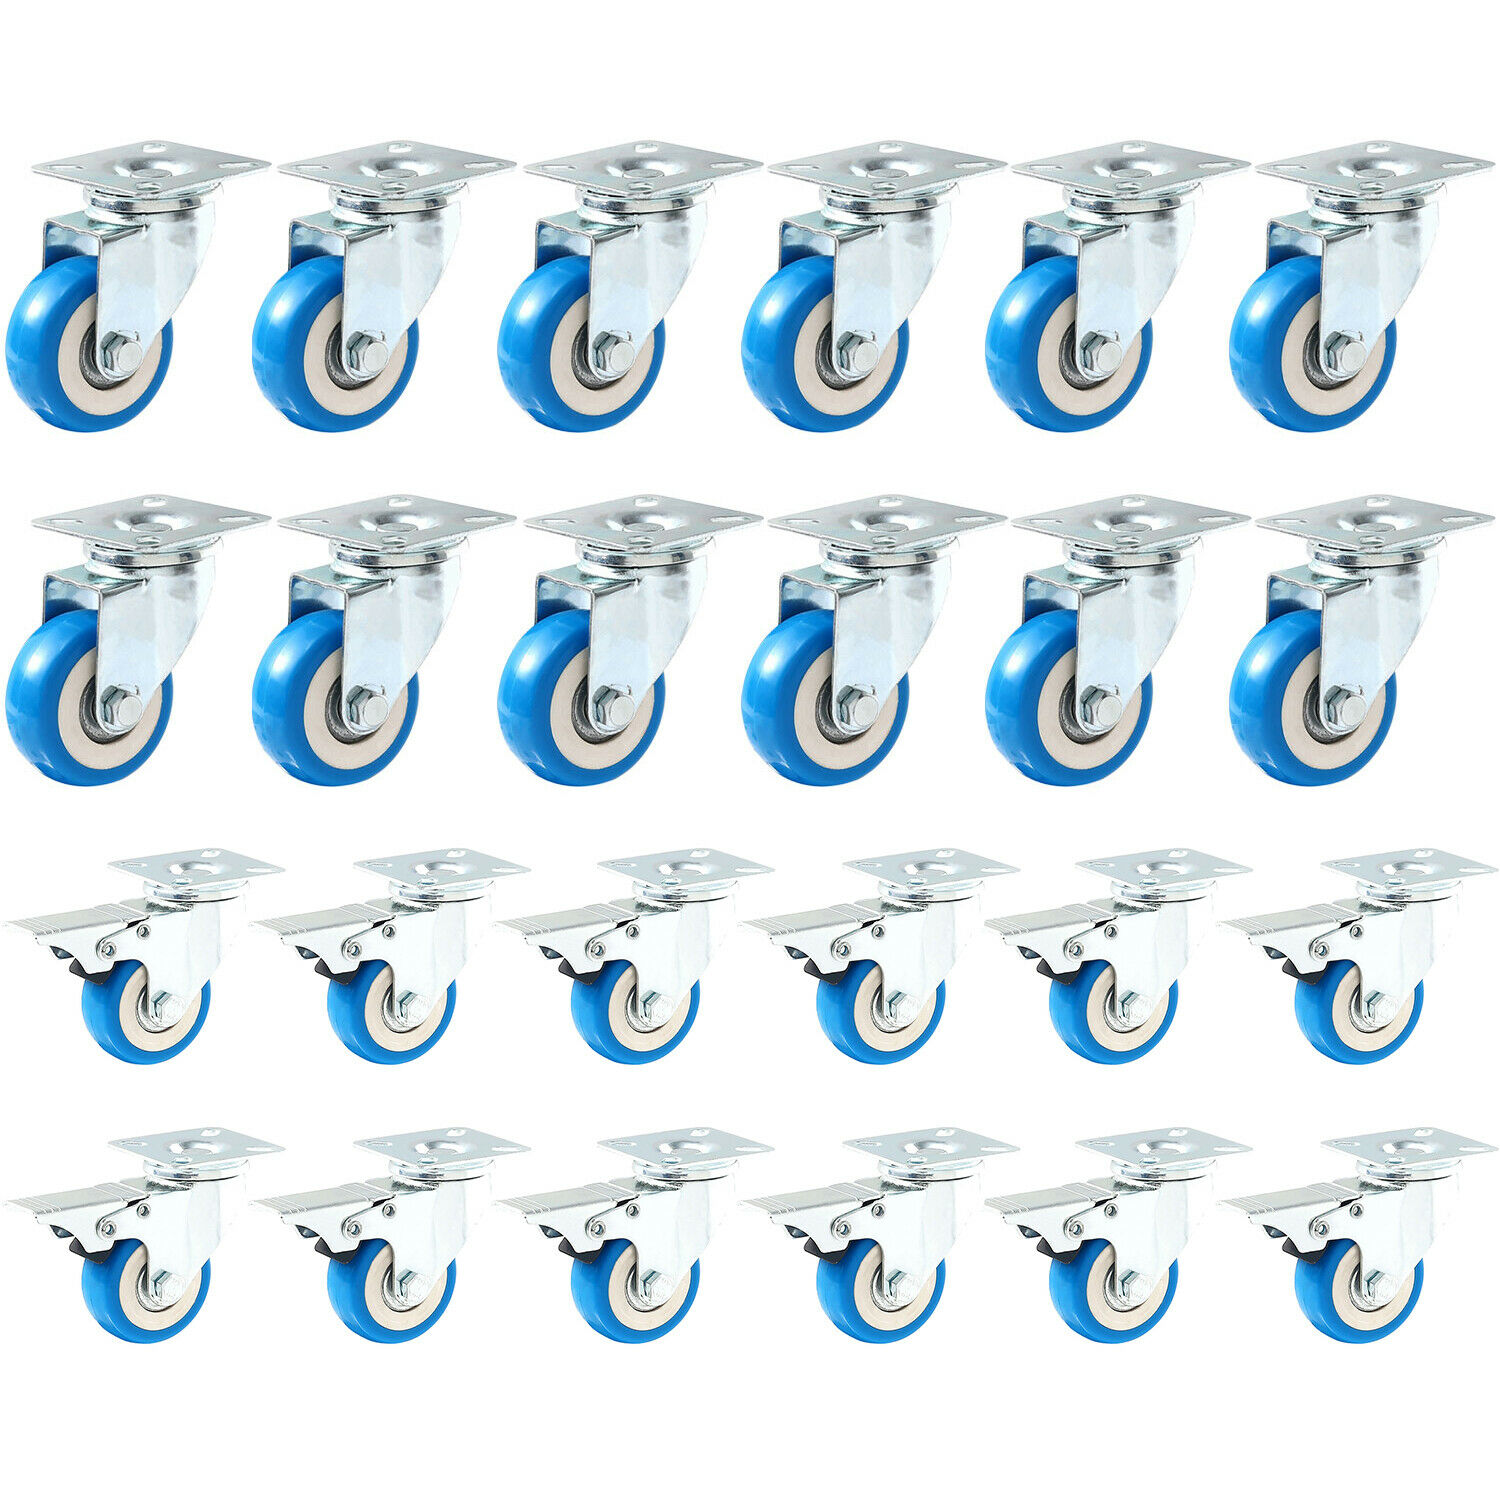 24 Pack Caster Swivel Plate With Brake Wheels(2" 12 W/ Brake And 12 No Brake)